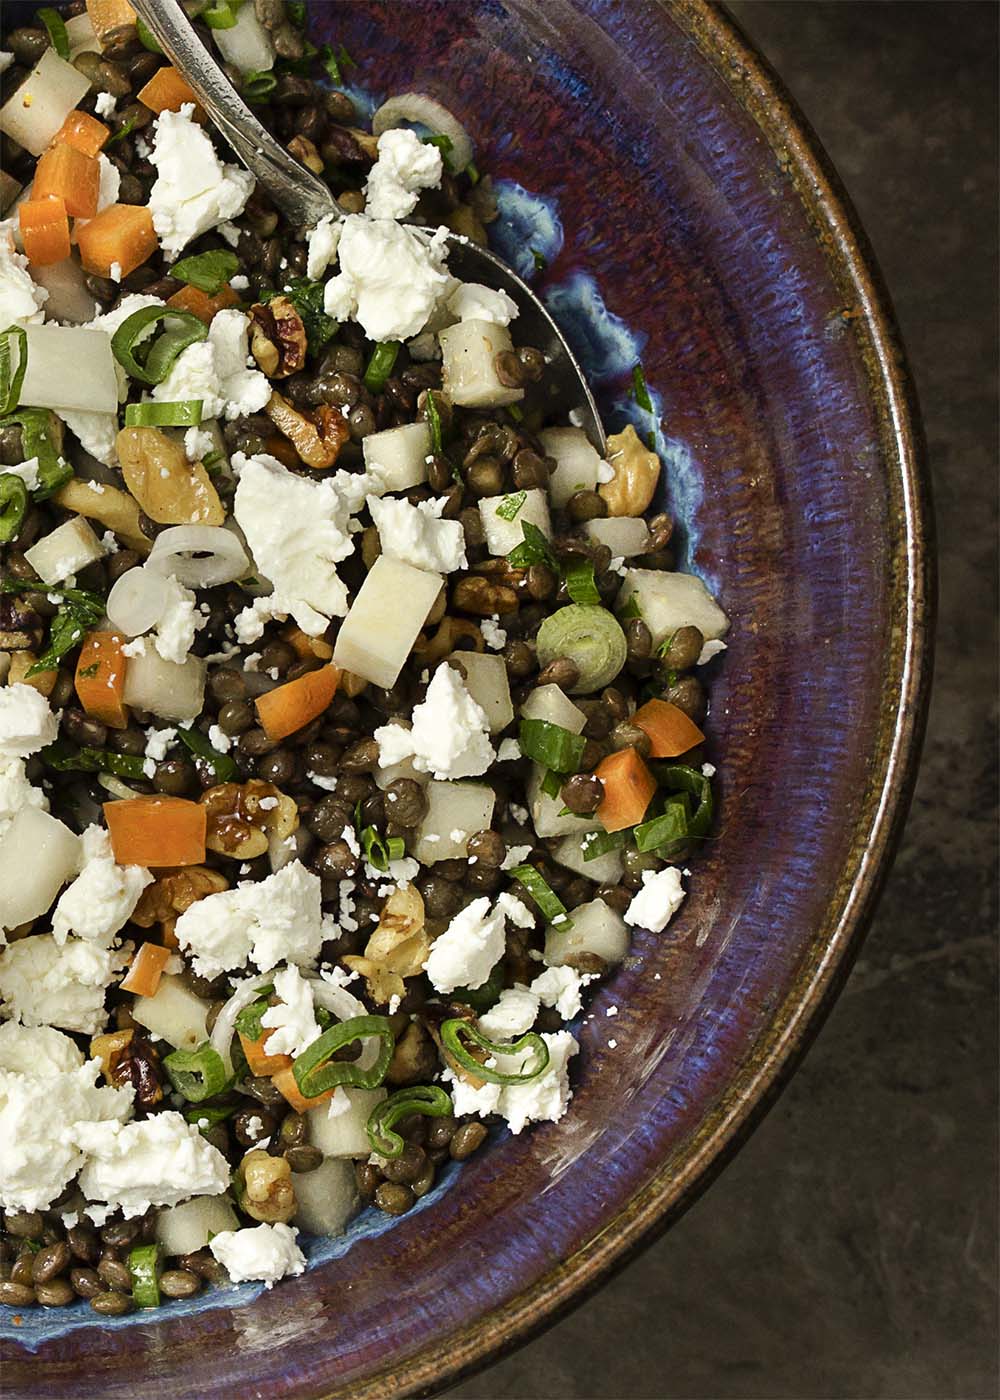 This cold French lentil and kohlrabi salad makes a great summer recipe! The spicy kohlrabi and earthy lentils are tossed with carrots and goat cheese for a tasty weeknight side dish. Healthy, easy, and quick! | justalittlebitofbacon.com